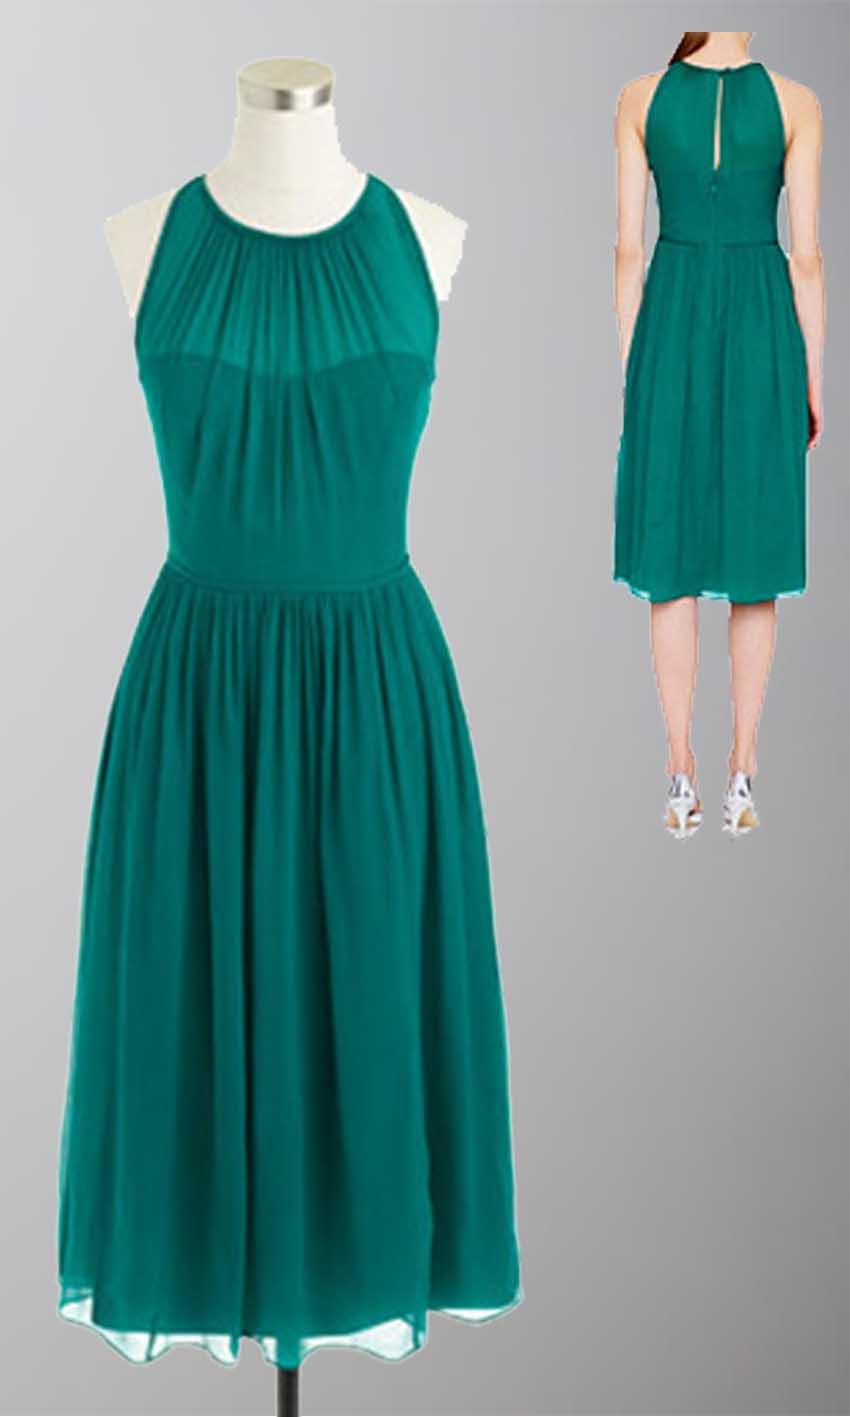 Mariage - Peacock Sleek Illusion Neckline Bridesmaid Dresses KSP178 [KSP178] - £87.00 : Cheap Prom Dresses Uk, Bridesmaid Dresses, 2014 Prom & Evening Dresses, Look for cheap elegant prom dresses 2014, cocktail gowns, or dresses for special occasions? kissprom.co.u